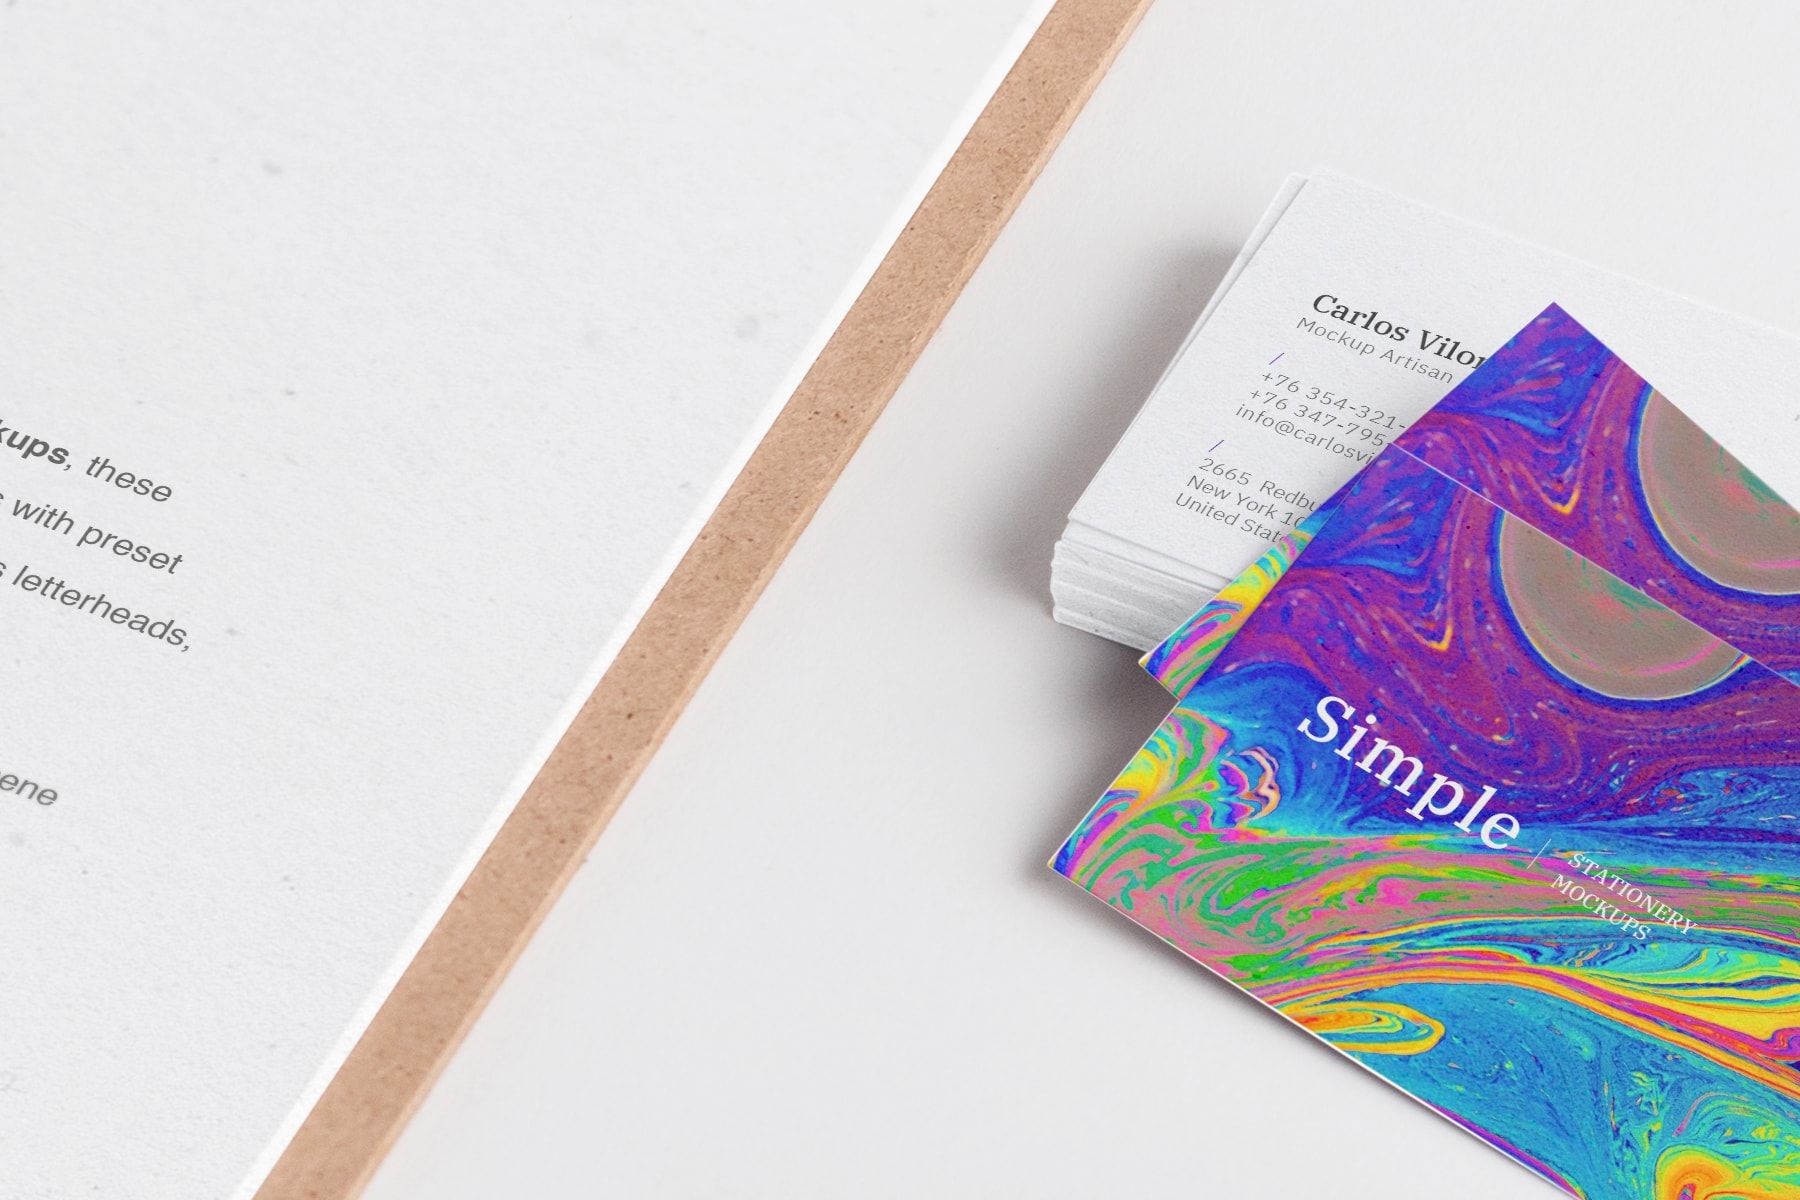 A4 Clipboard and Business Cards Mockup 01